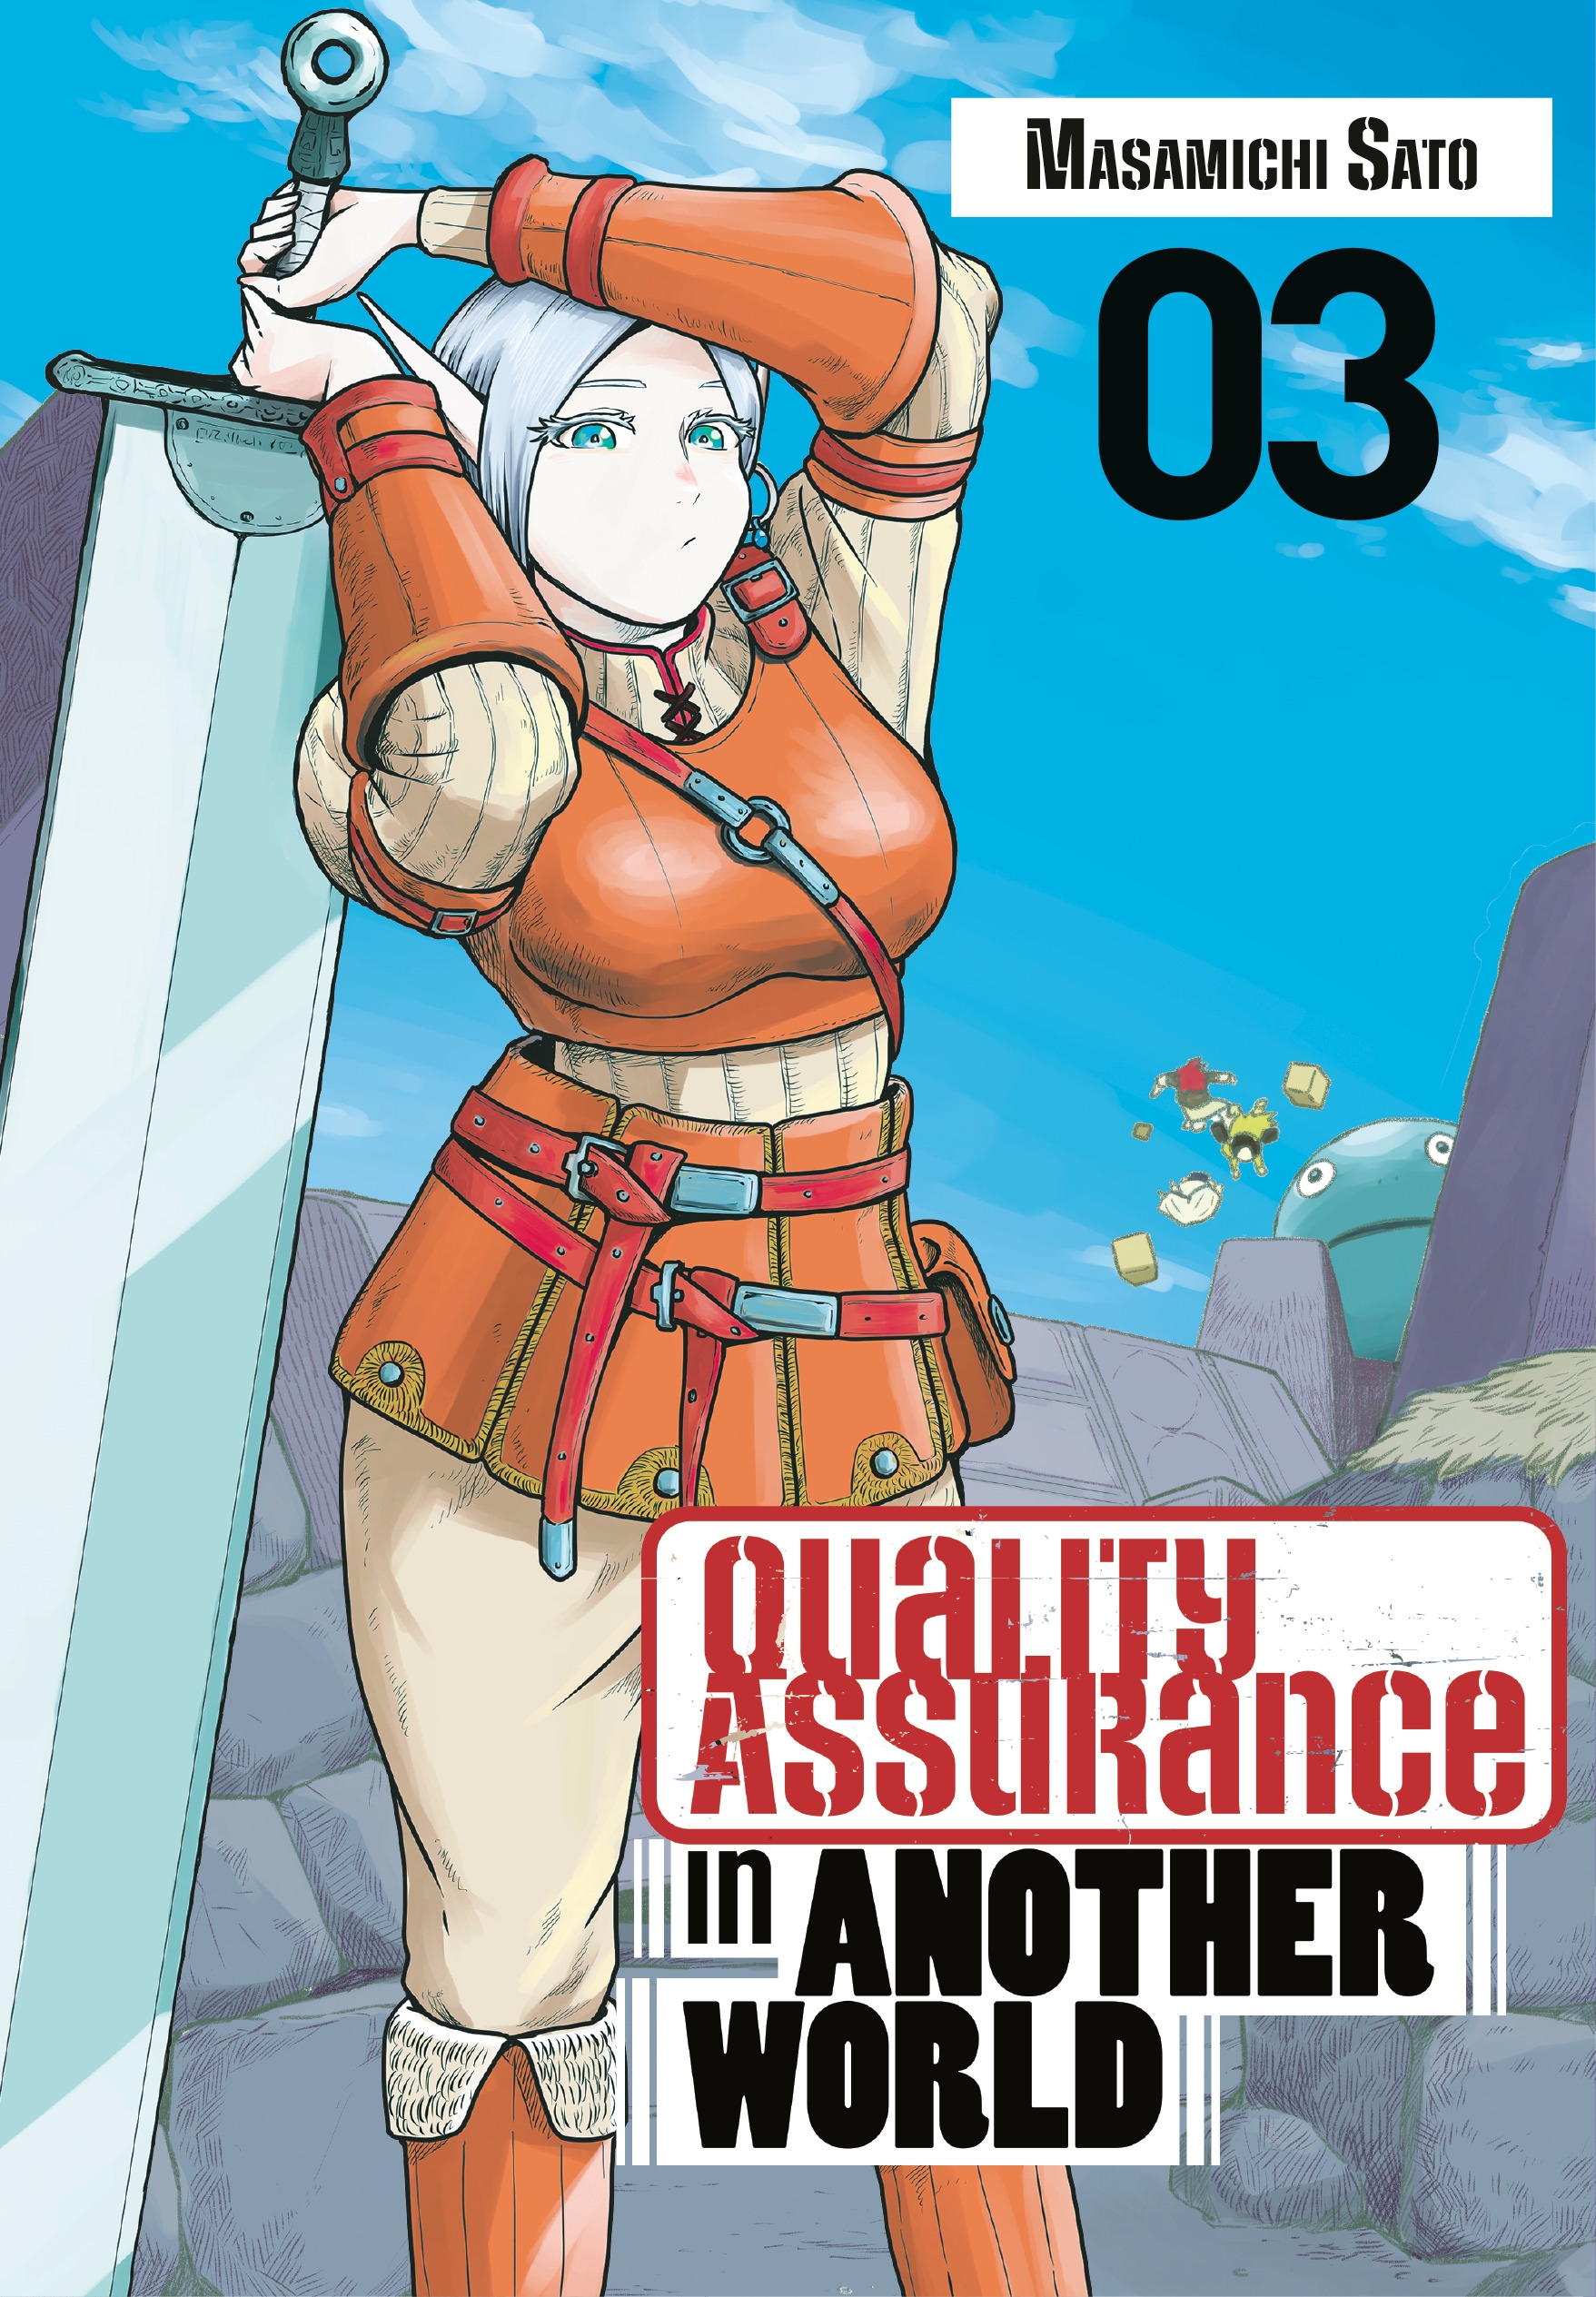 Quality Assurance in Another World 3 by Masamichi Sato - Penguin 